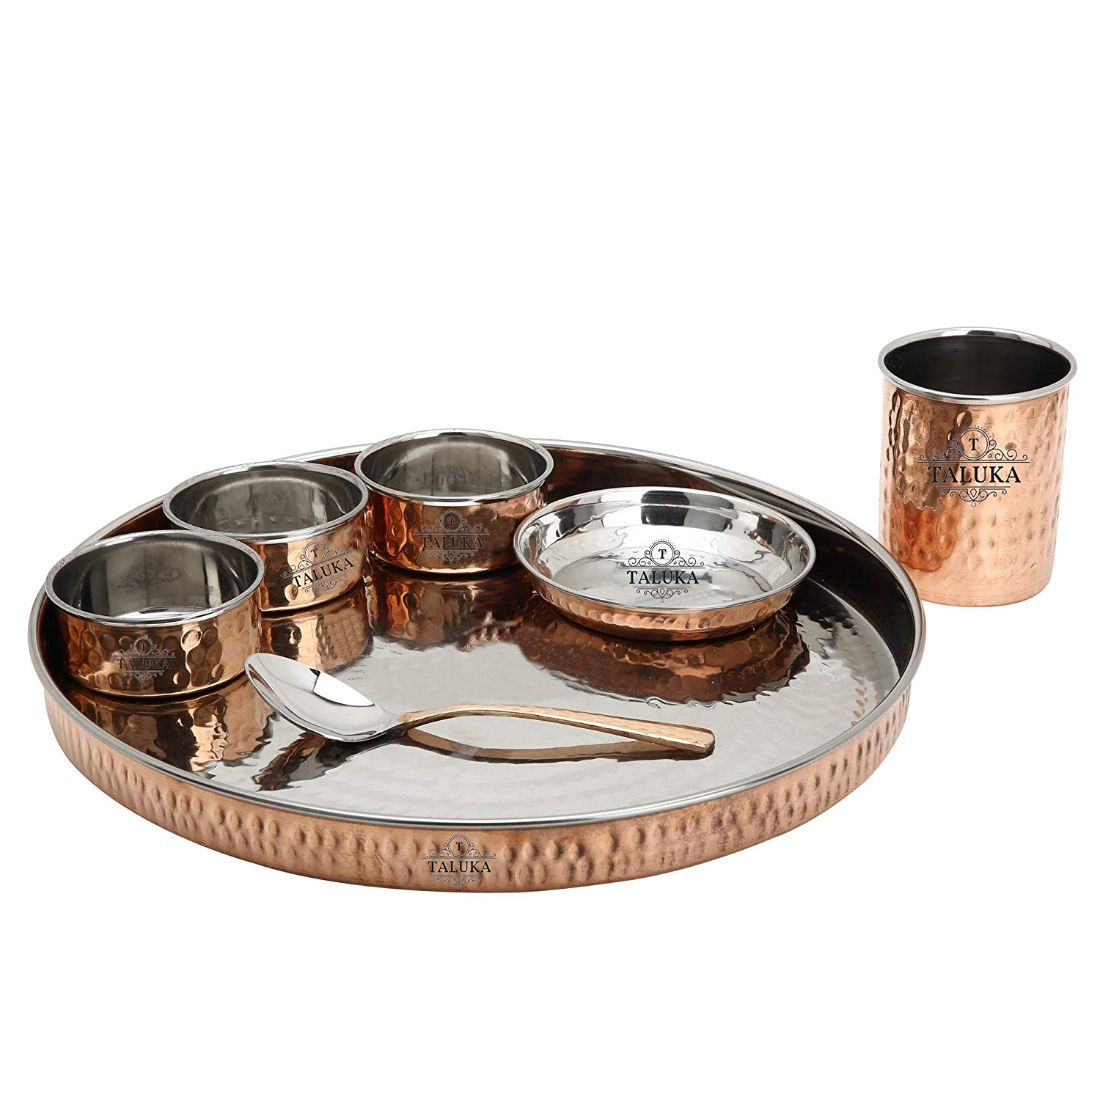 Copper Steel Hand Made Kitchen Plate/Thali Dinner Set of 7 (1 Thali, 3 Bowls, 1 Pudding Bowl, 1 Spoon, 1 Copper Glass) Hotel Home Dinnerware Gifting Purposes